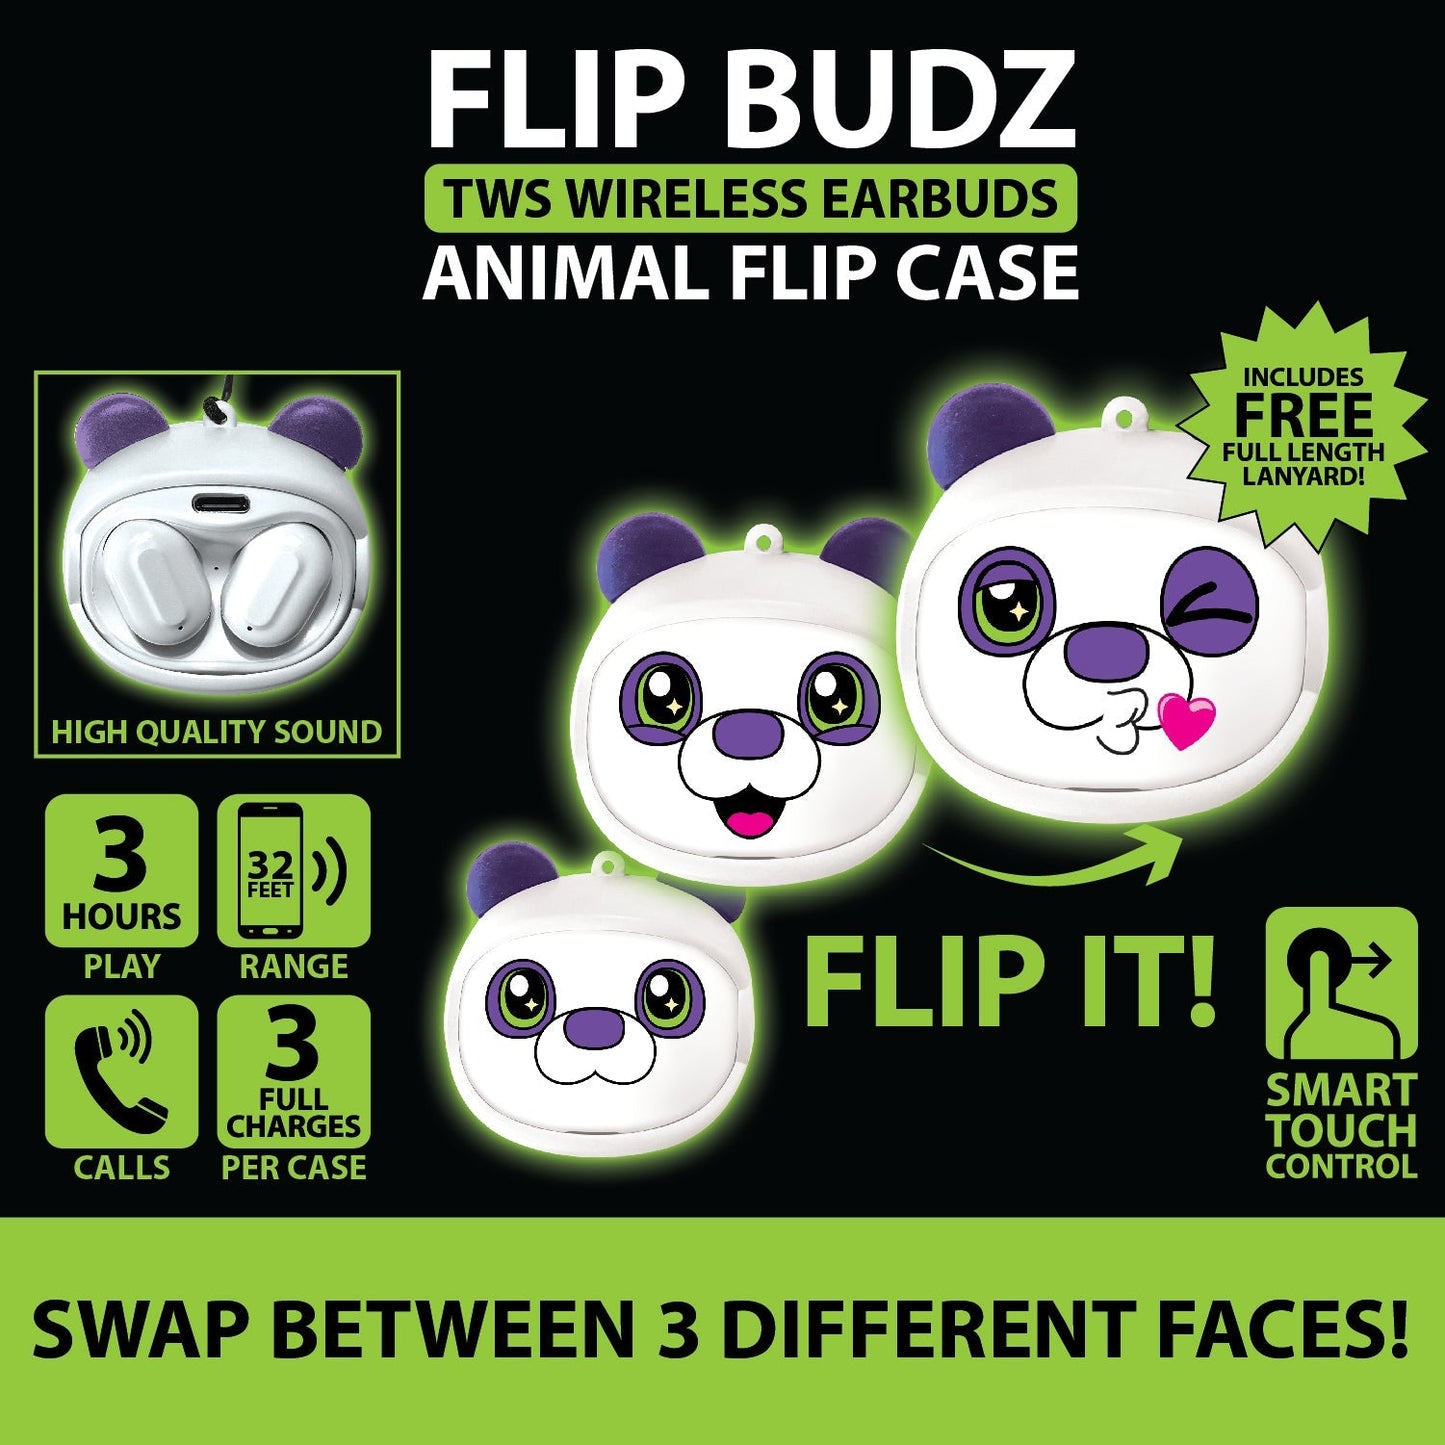 ITEM NUMBER 023561 ANIMAL FACE EARBUDS 6 PIECES PER DISPLAY